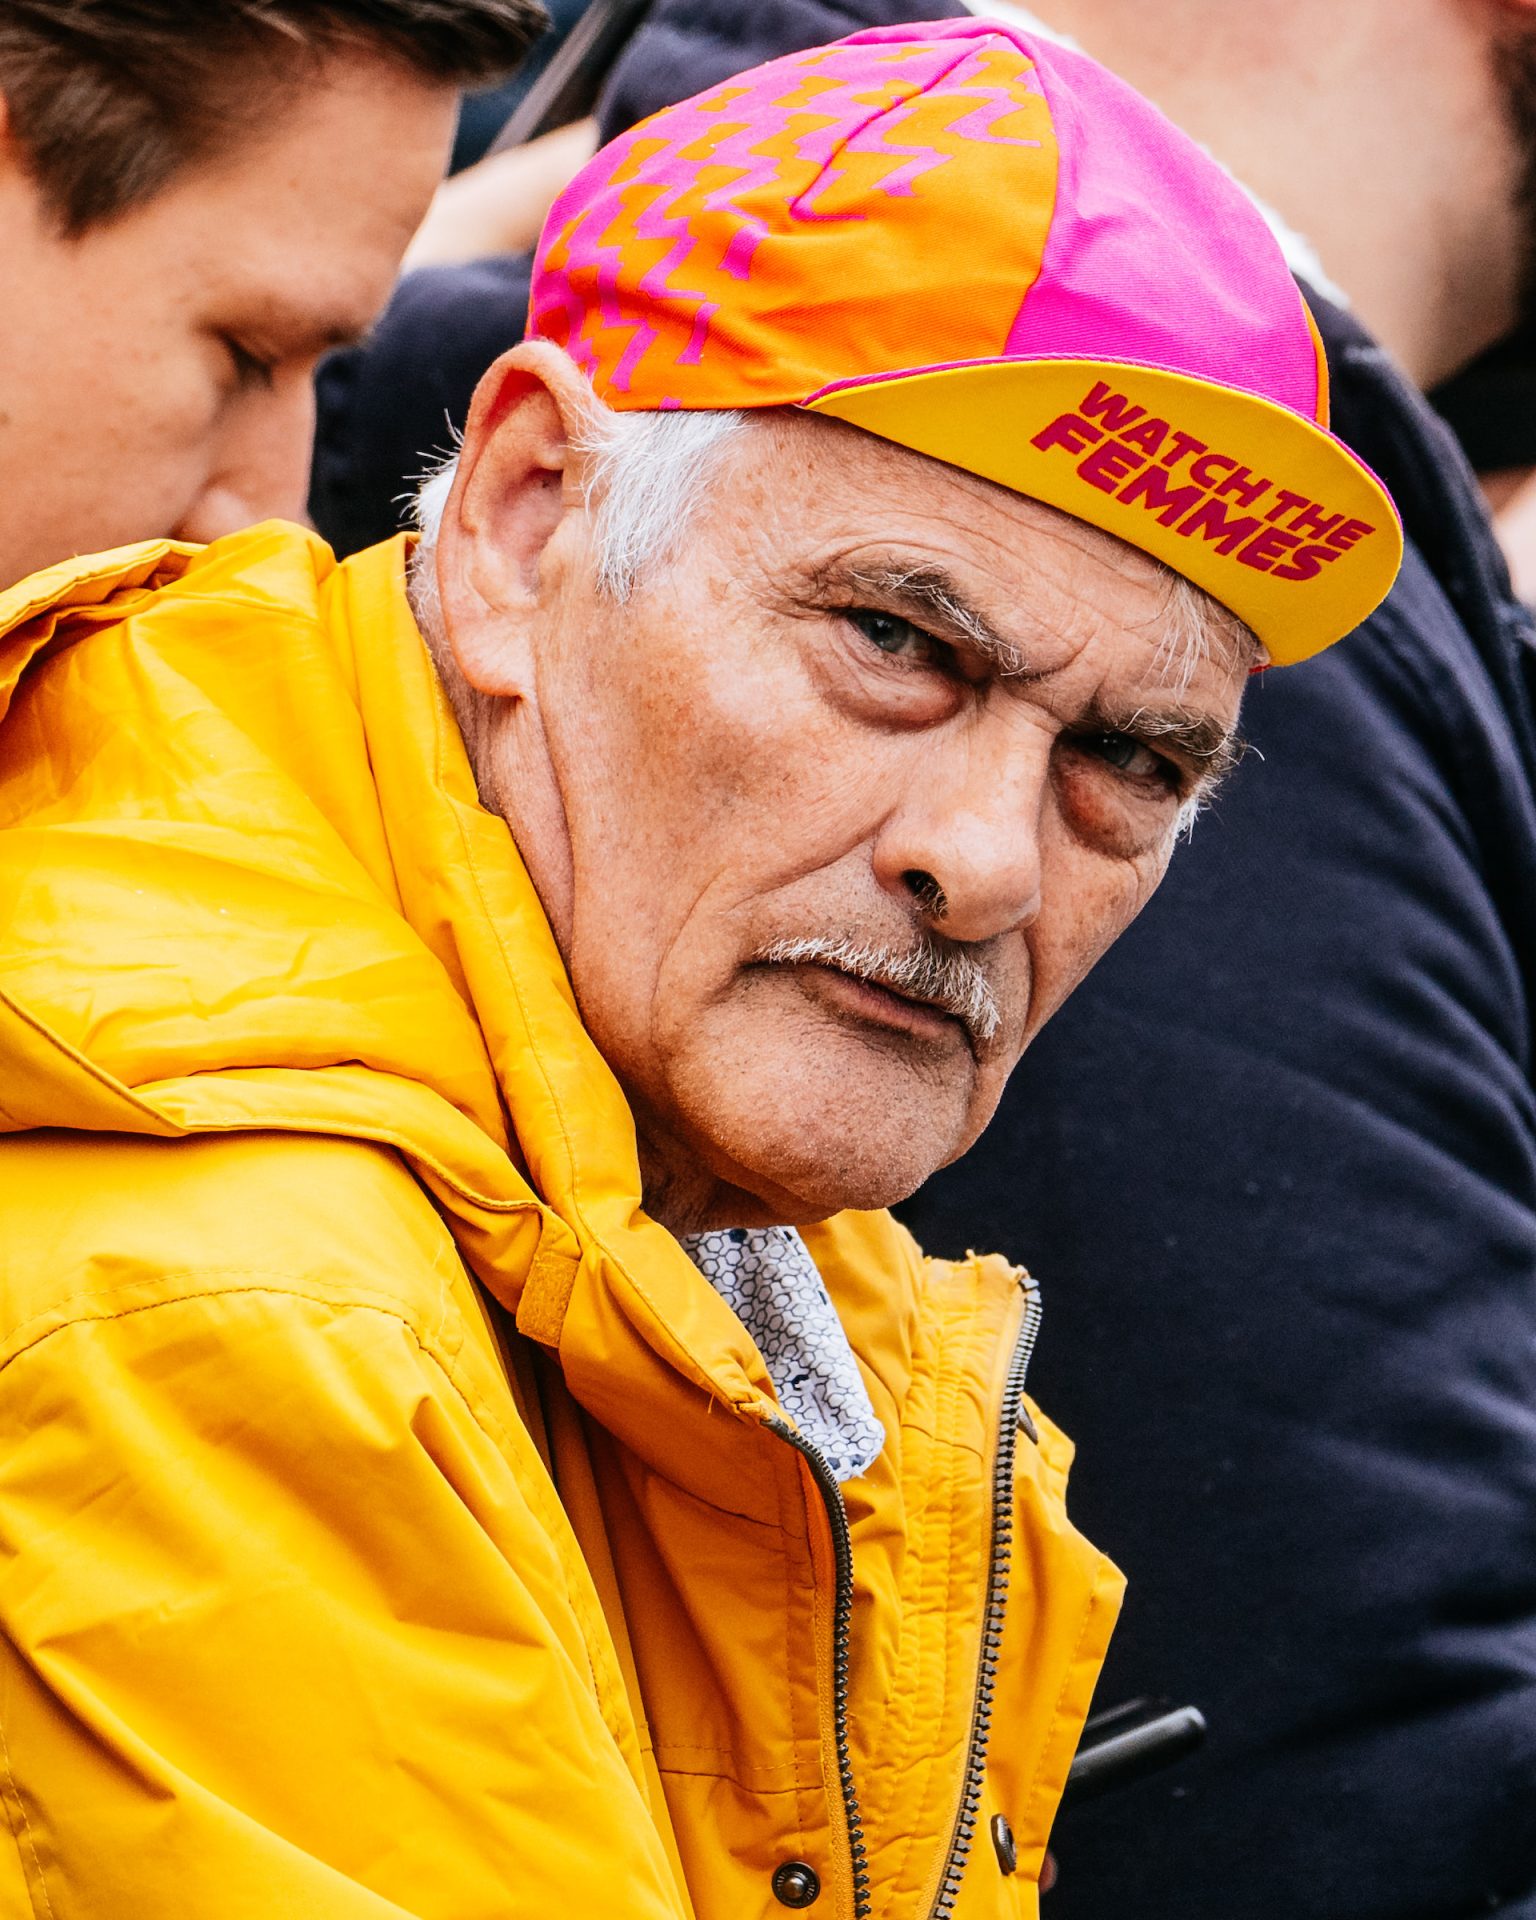 A close up of a supporter wearing a pink and yellow 'Watch the Femmes' cap. The man, with a thin moustache, wisps of white hair and a bright yellow rain jacket appears to be staring directly at the camera, his brow furled in deep concentration.